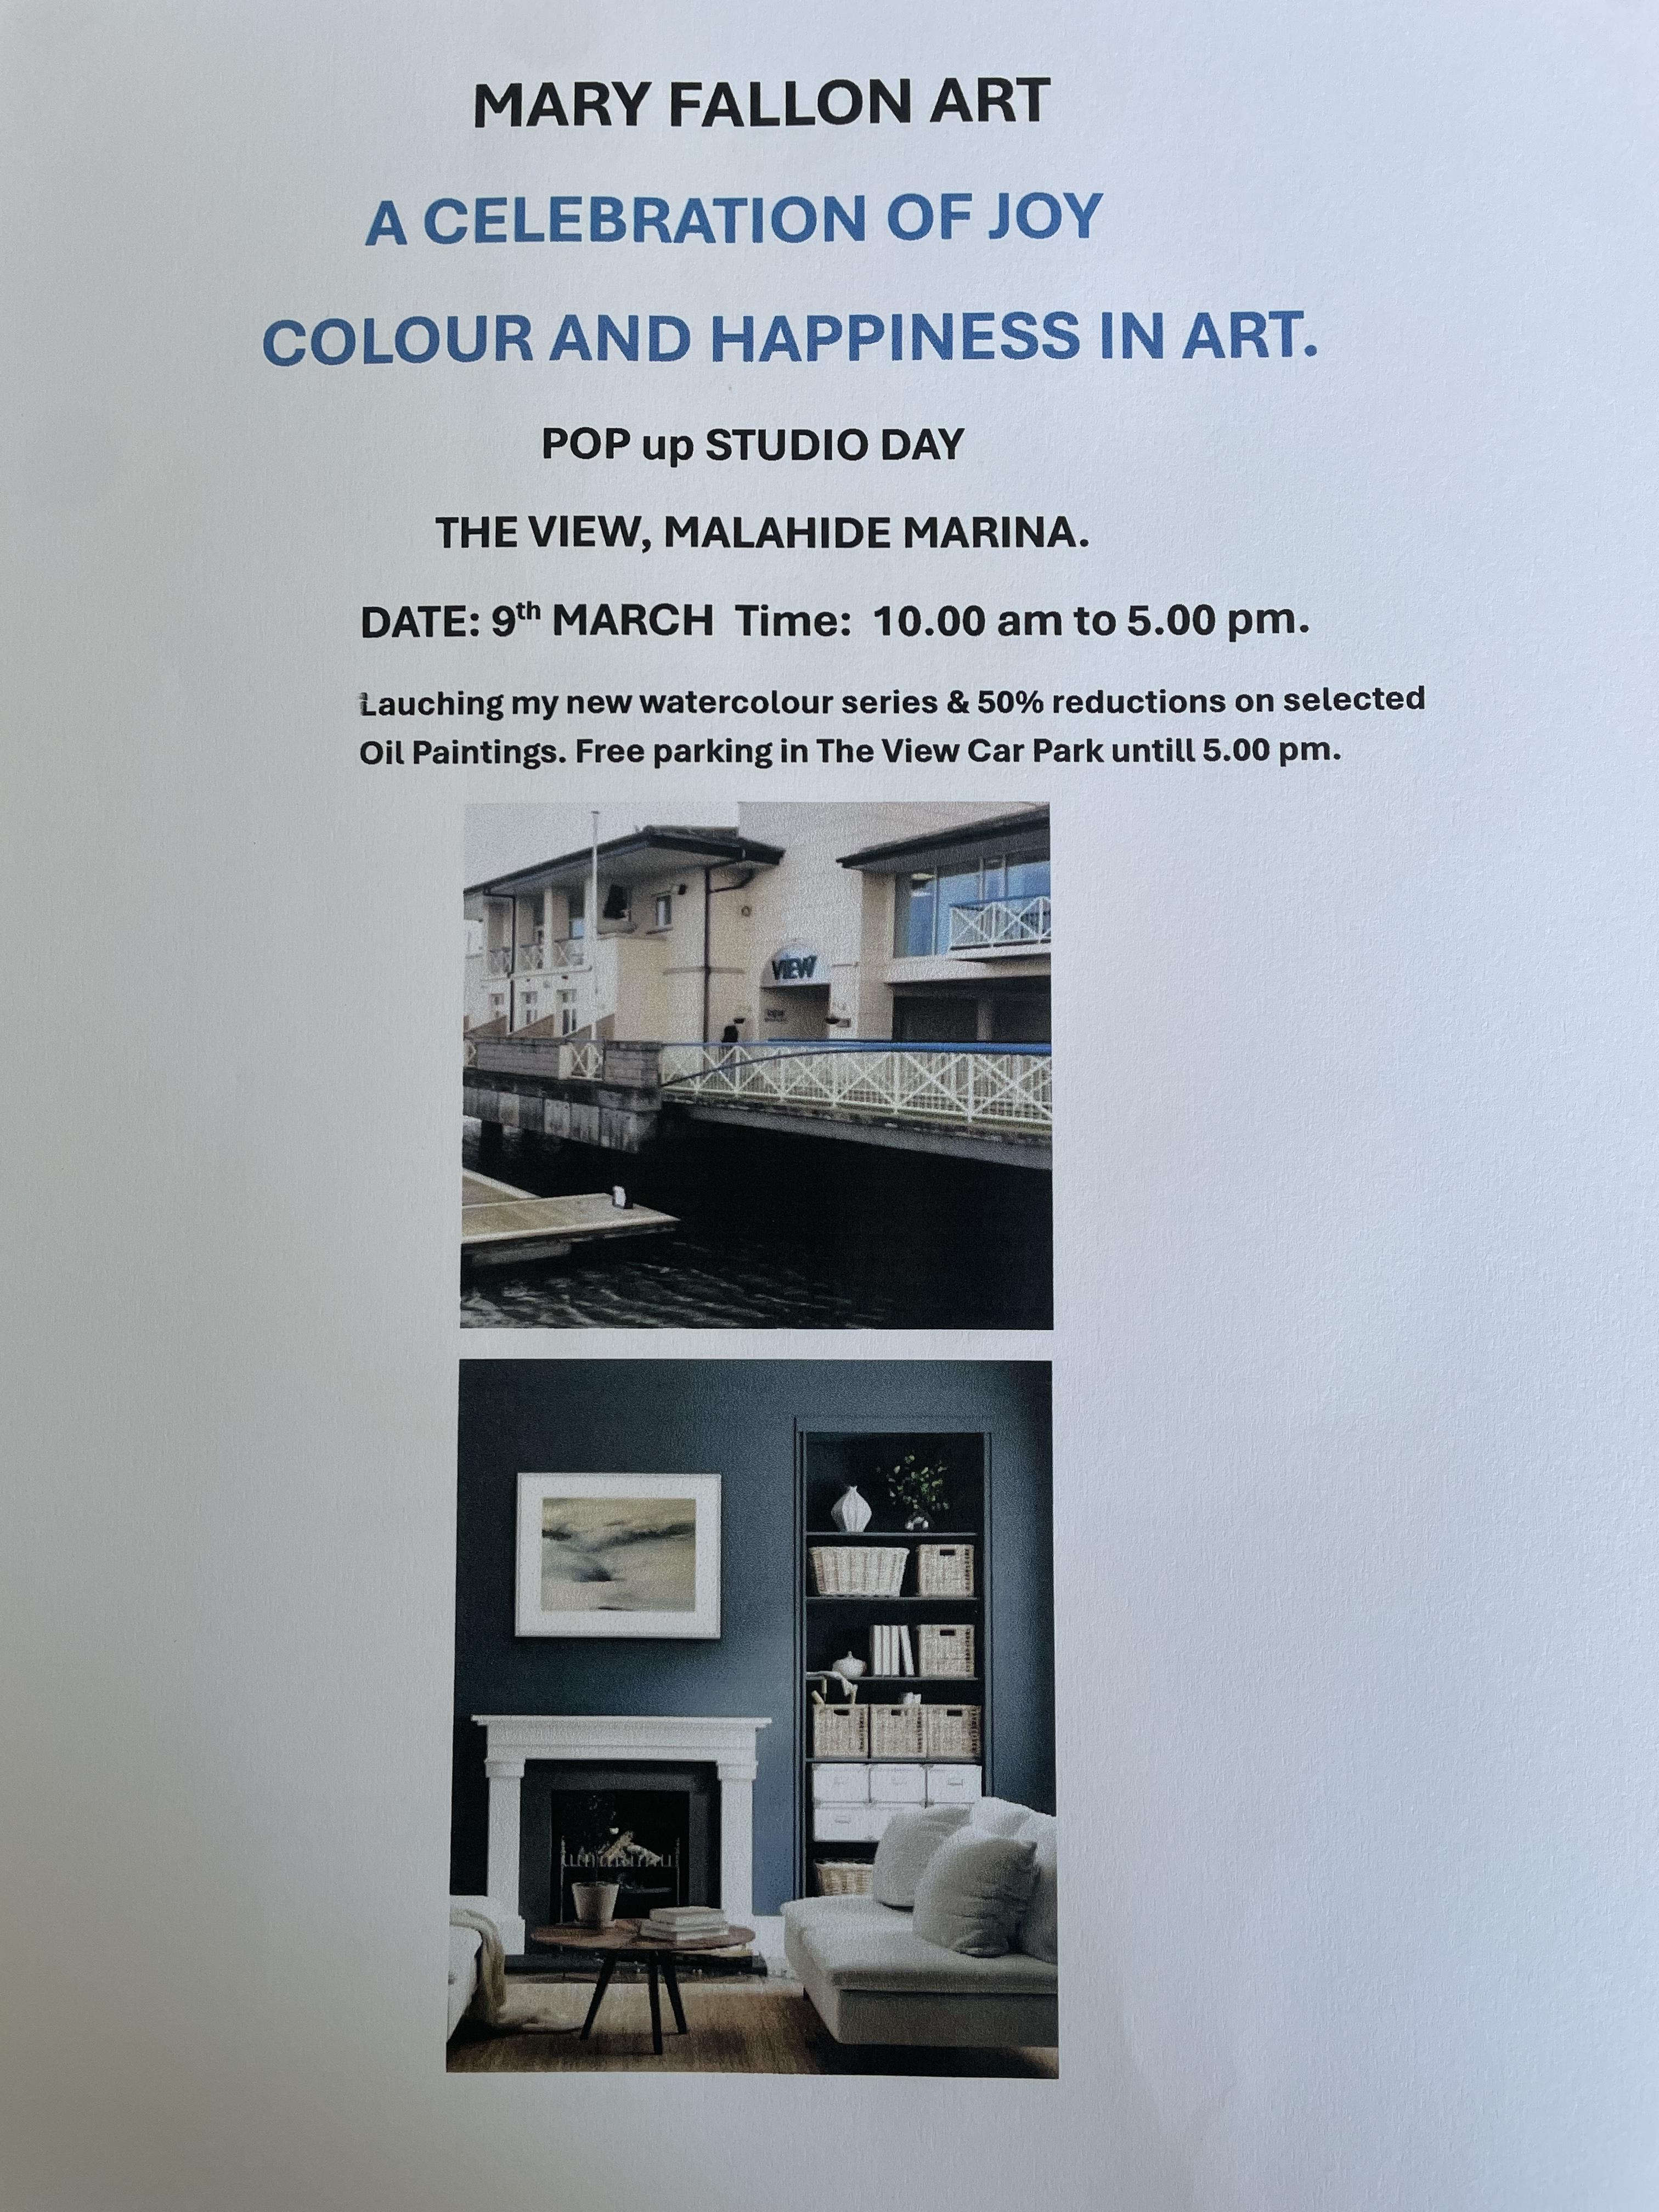 Pop up Studio day in The View , Malahide Marina. Date 9th March, 10.00 am - 4.30 pm.